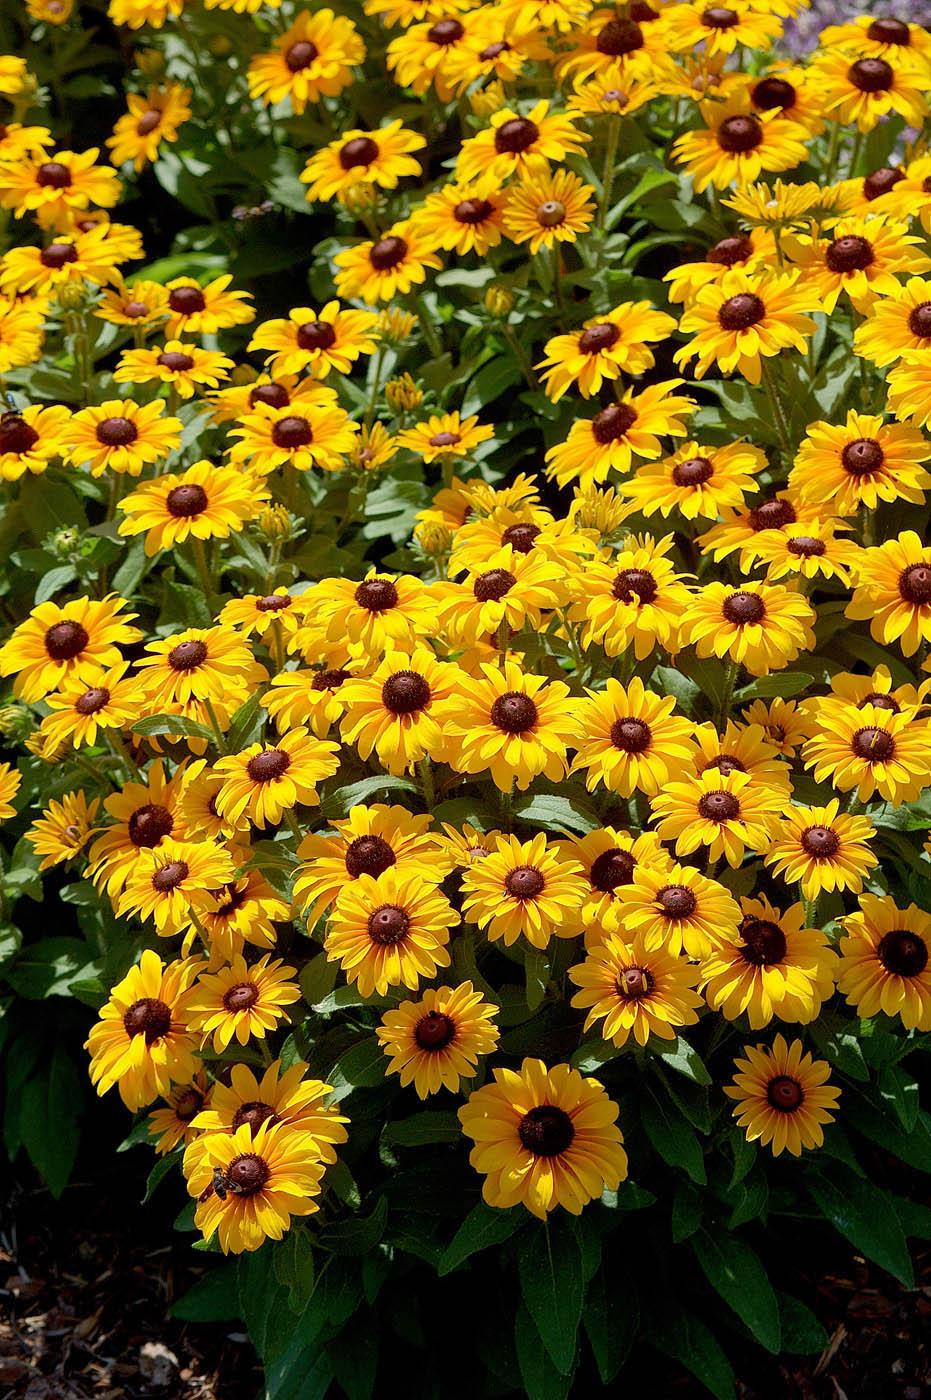 The tennis ball size flowers of the TigerEye rudbekia plants growing in Mississippi State University's trials are eye catching. TigerEye will get about 24 inches tall with an equal spread. They may be hard to find until next year, but they will be a prize then. (Photo by Norman Winter)